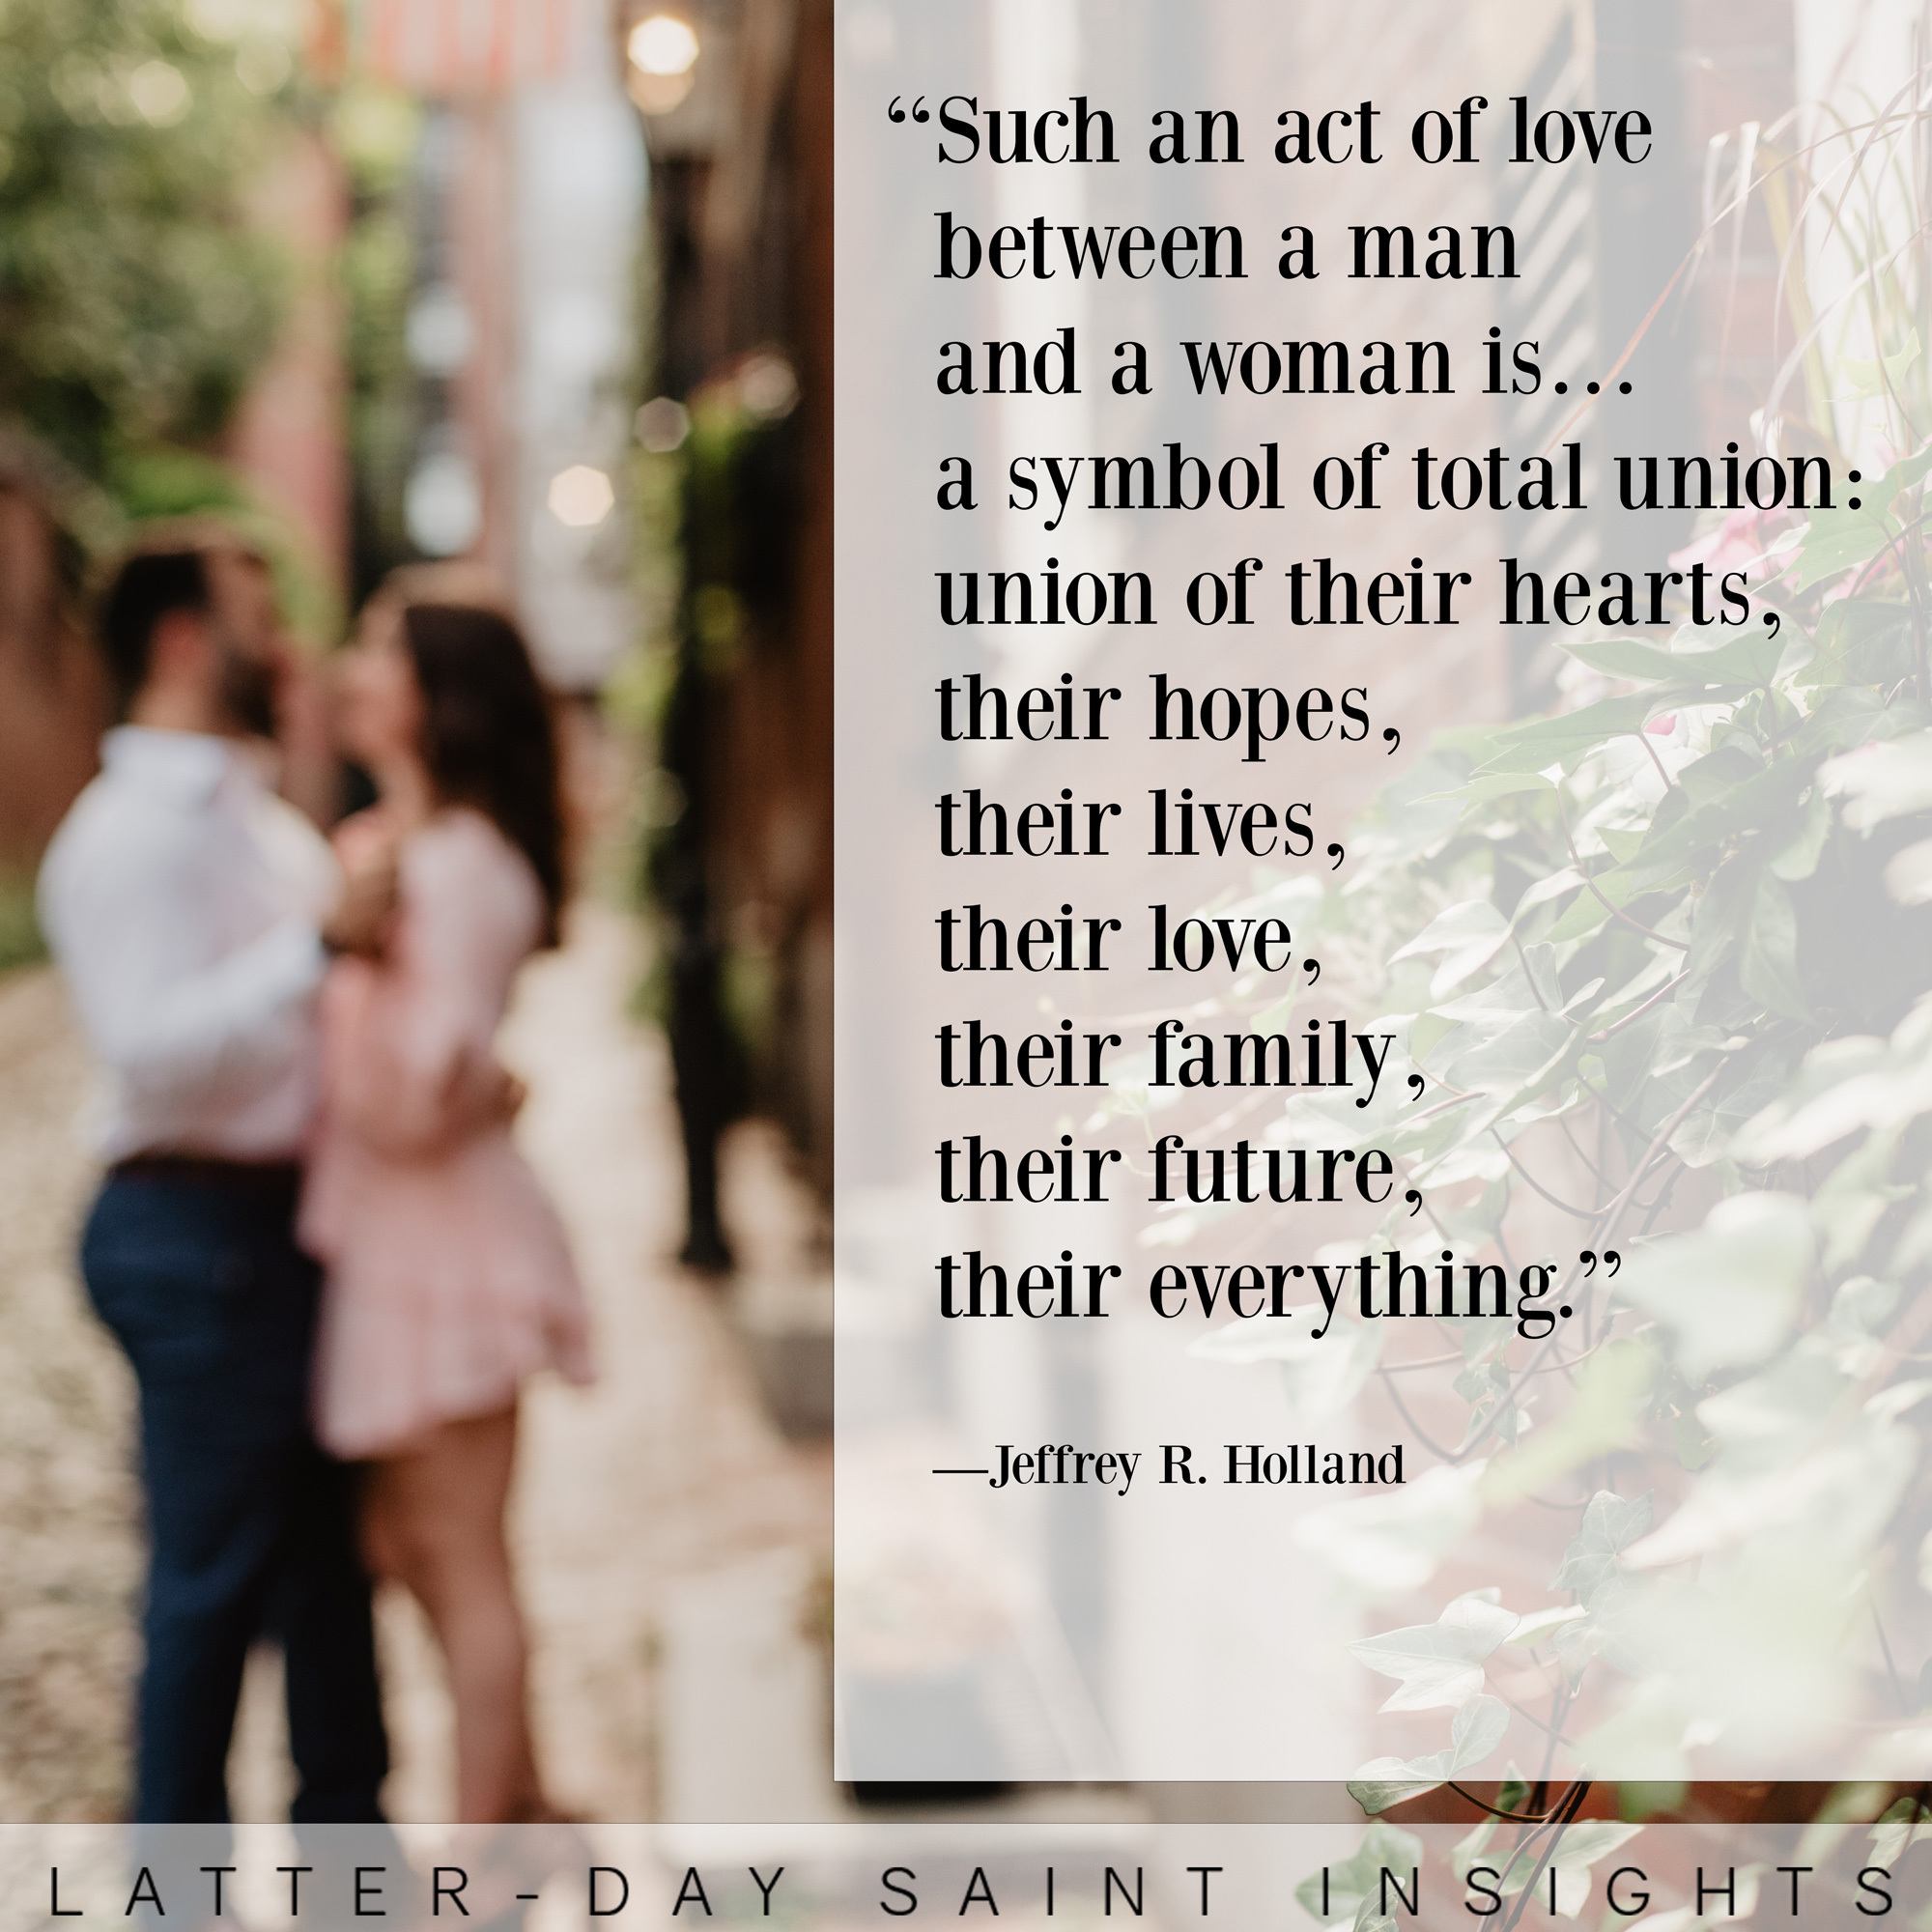 such an act of love between a man and a woman is… a symbol of total union: union of their hearts, their hopes, their lives, their love, their family, their future, their everything. —Jeffrey R. Holland